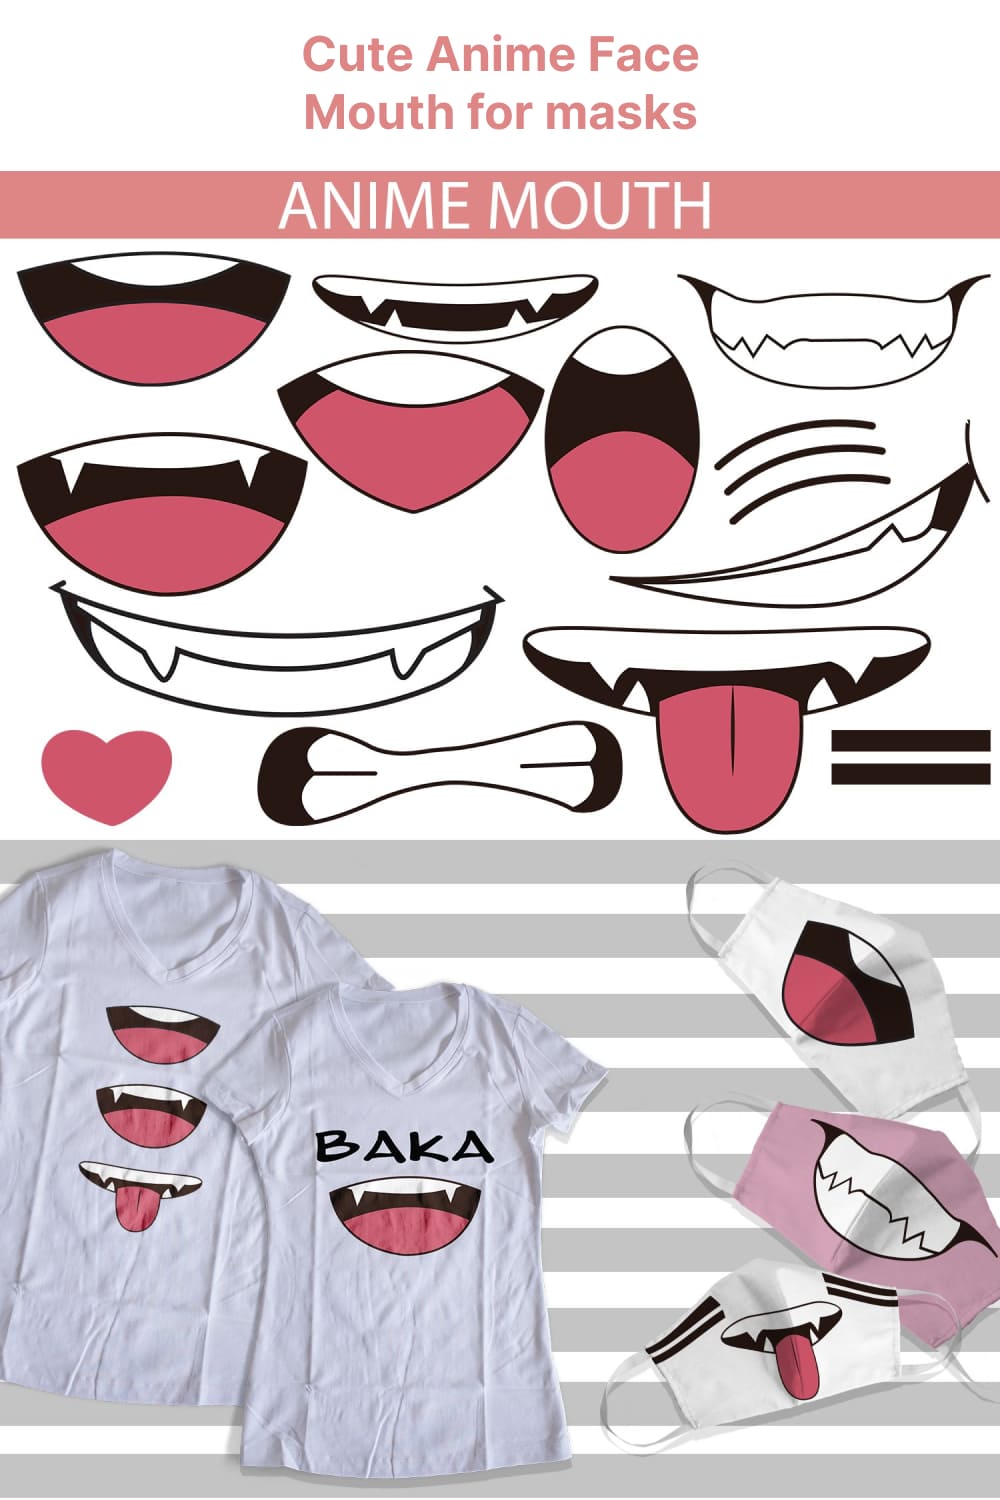 Cute Anime Face Mouth For Masks - Pinterest.